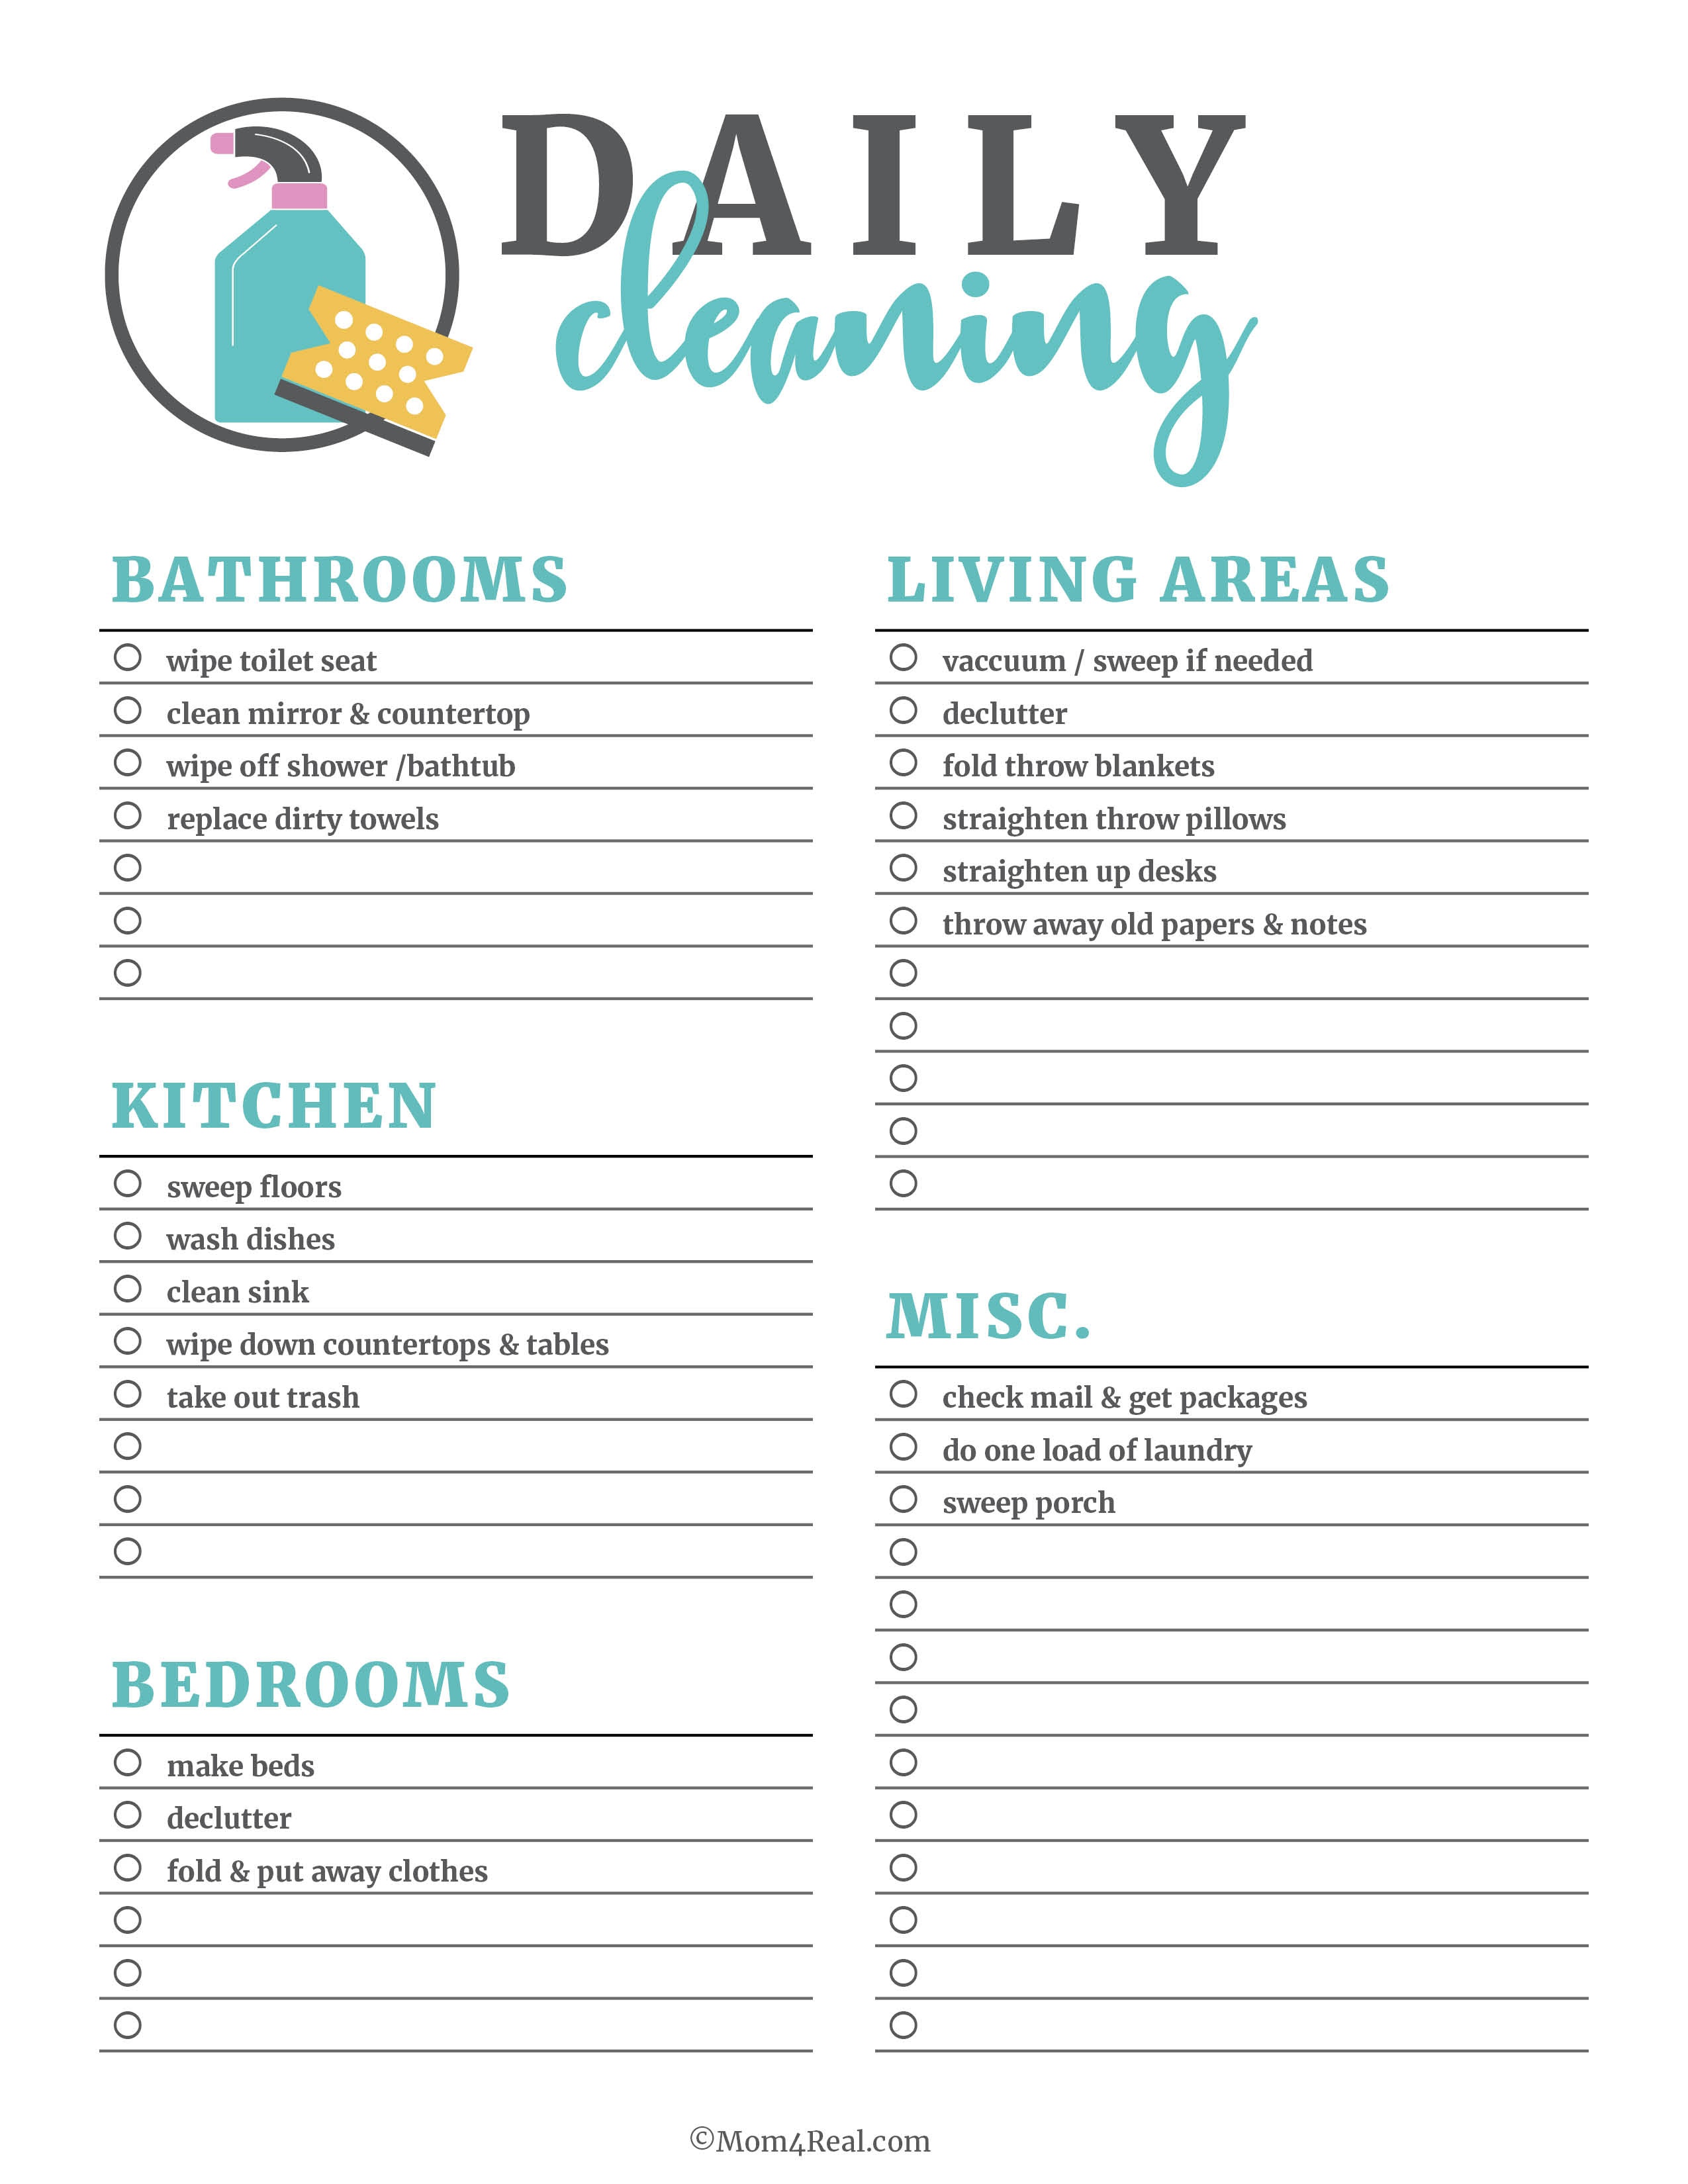 Printable Cleaning Checklists For Daily, Weekly And Monthly Cleaning - Free Printable Housework Checklist